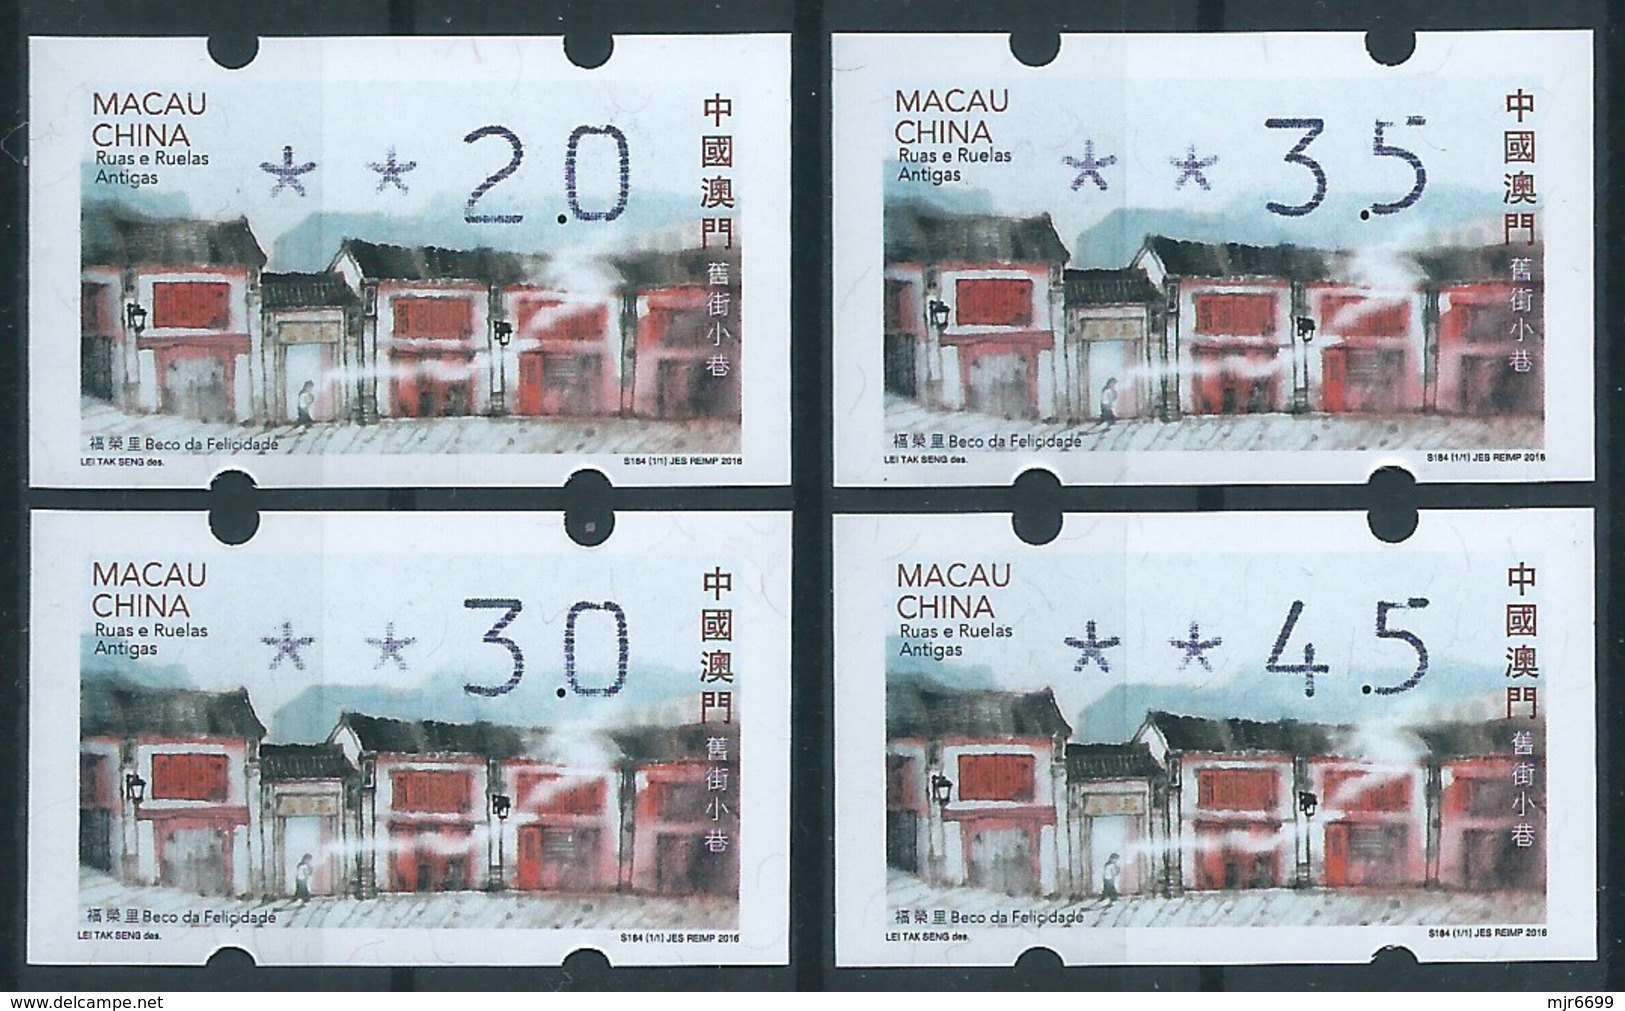 MACAU 2016 ATM LABELS STREETS AND ALLEYS KLUSSENDORF MACHINE BOTTOM SET OF 4 - Distribuidores